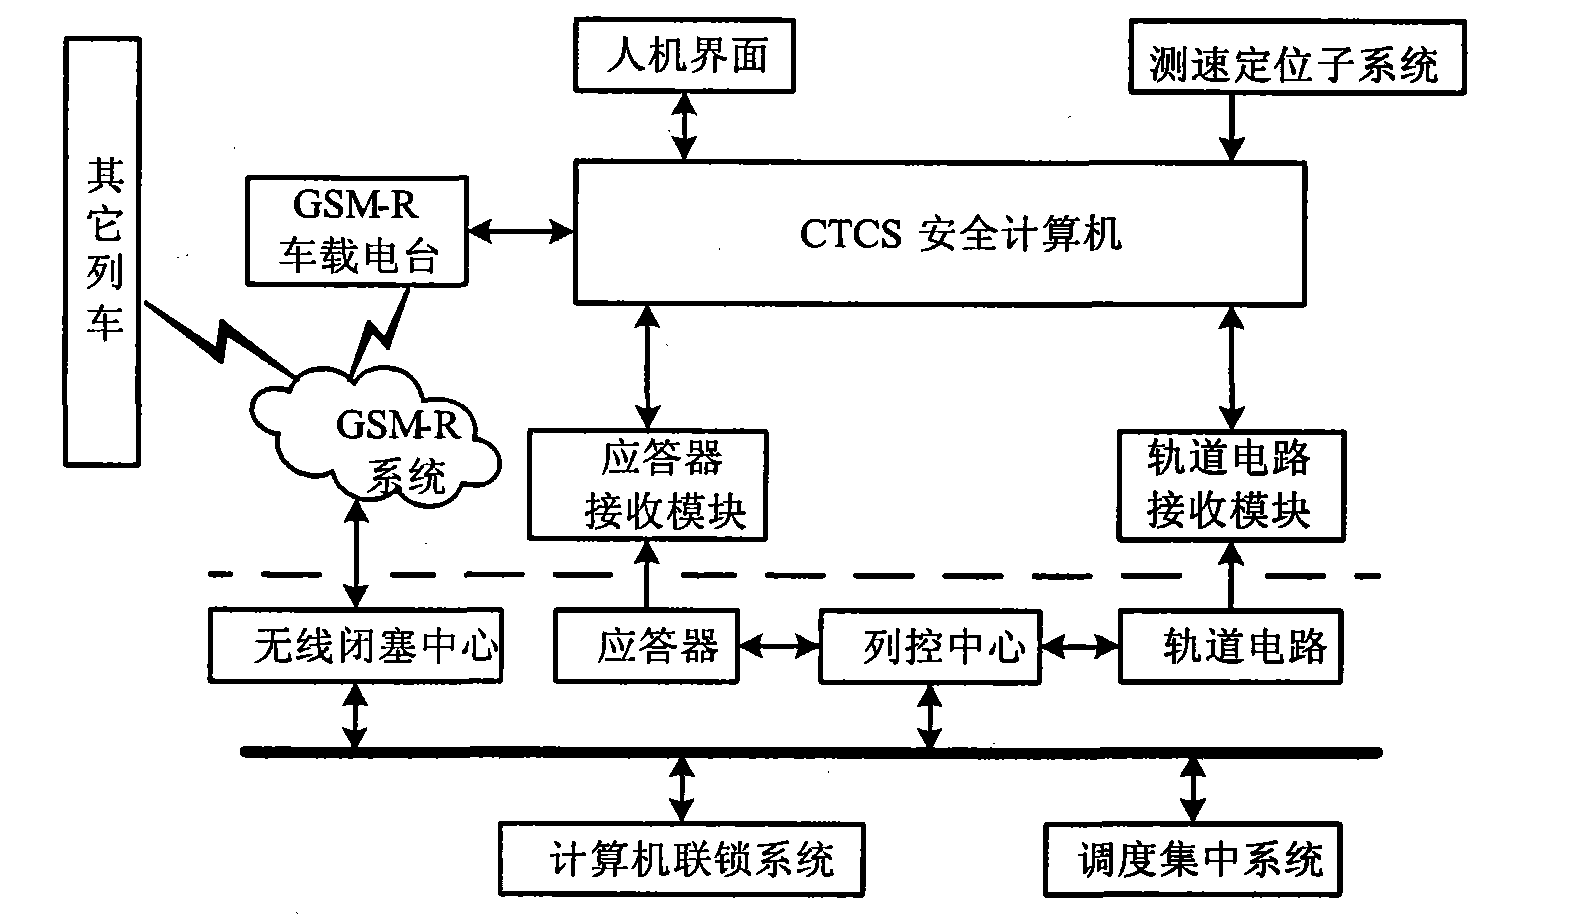 Safety overlay collision avoidance system for train of CTCS (Chinese Train Control System) based on vehicular-to-vehicular communication and method thereof